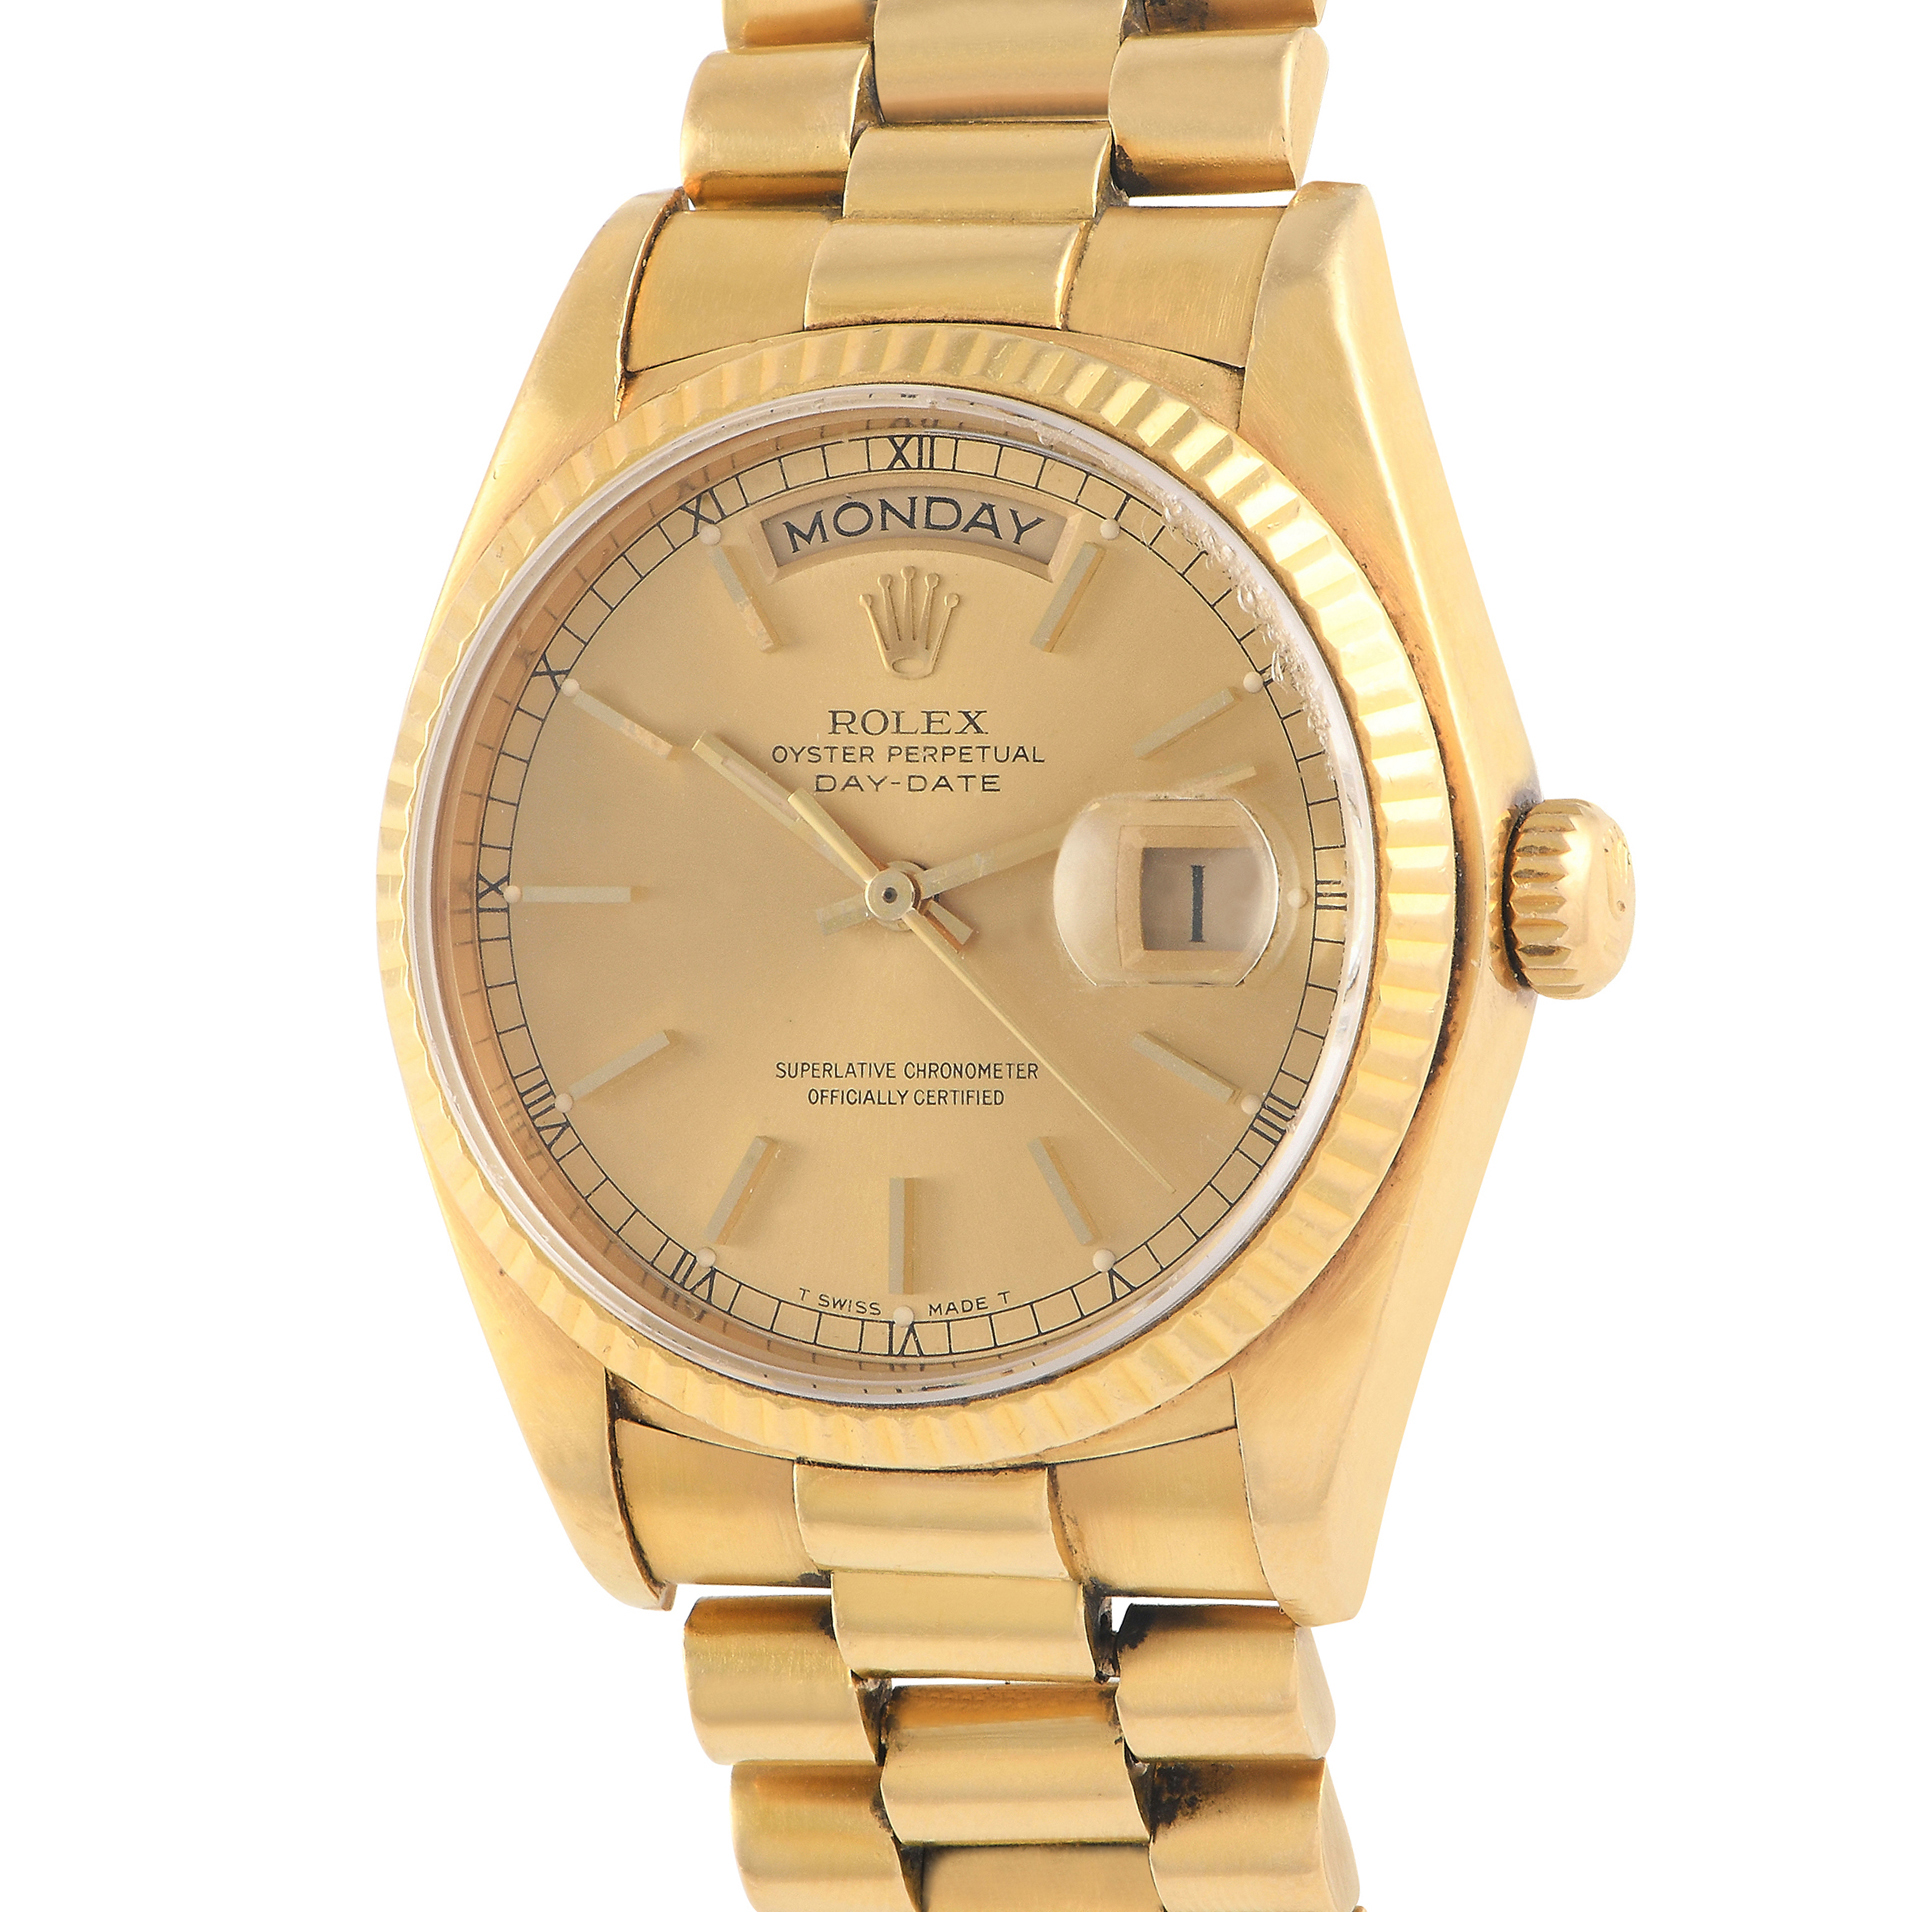 Rolex Day-Date 36 Champagne Dial Watch 18038